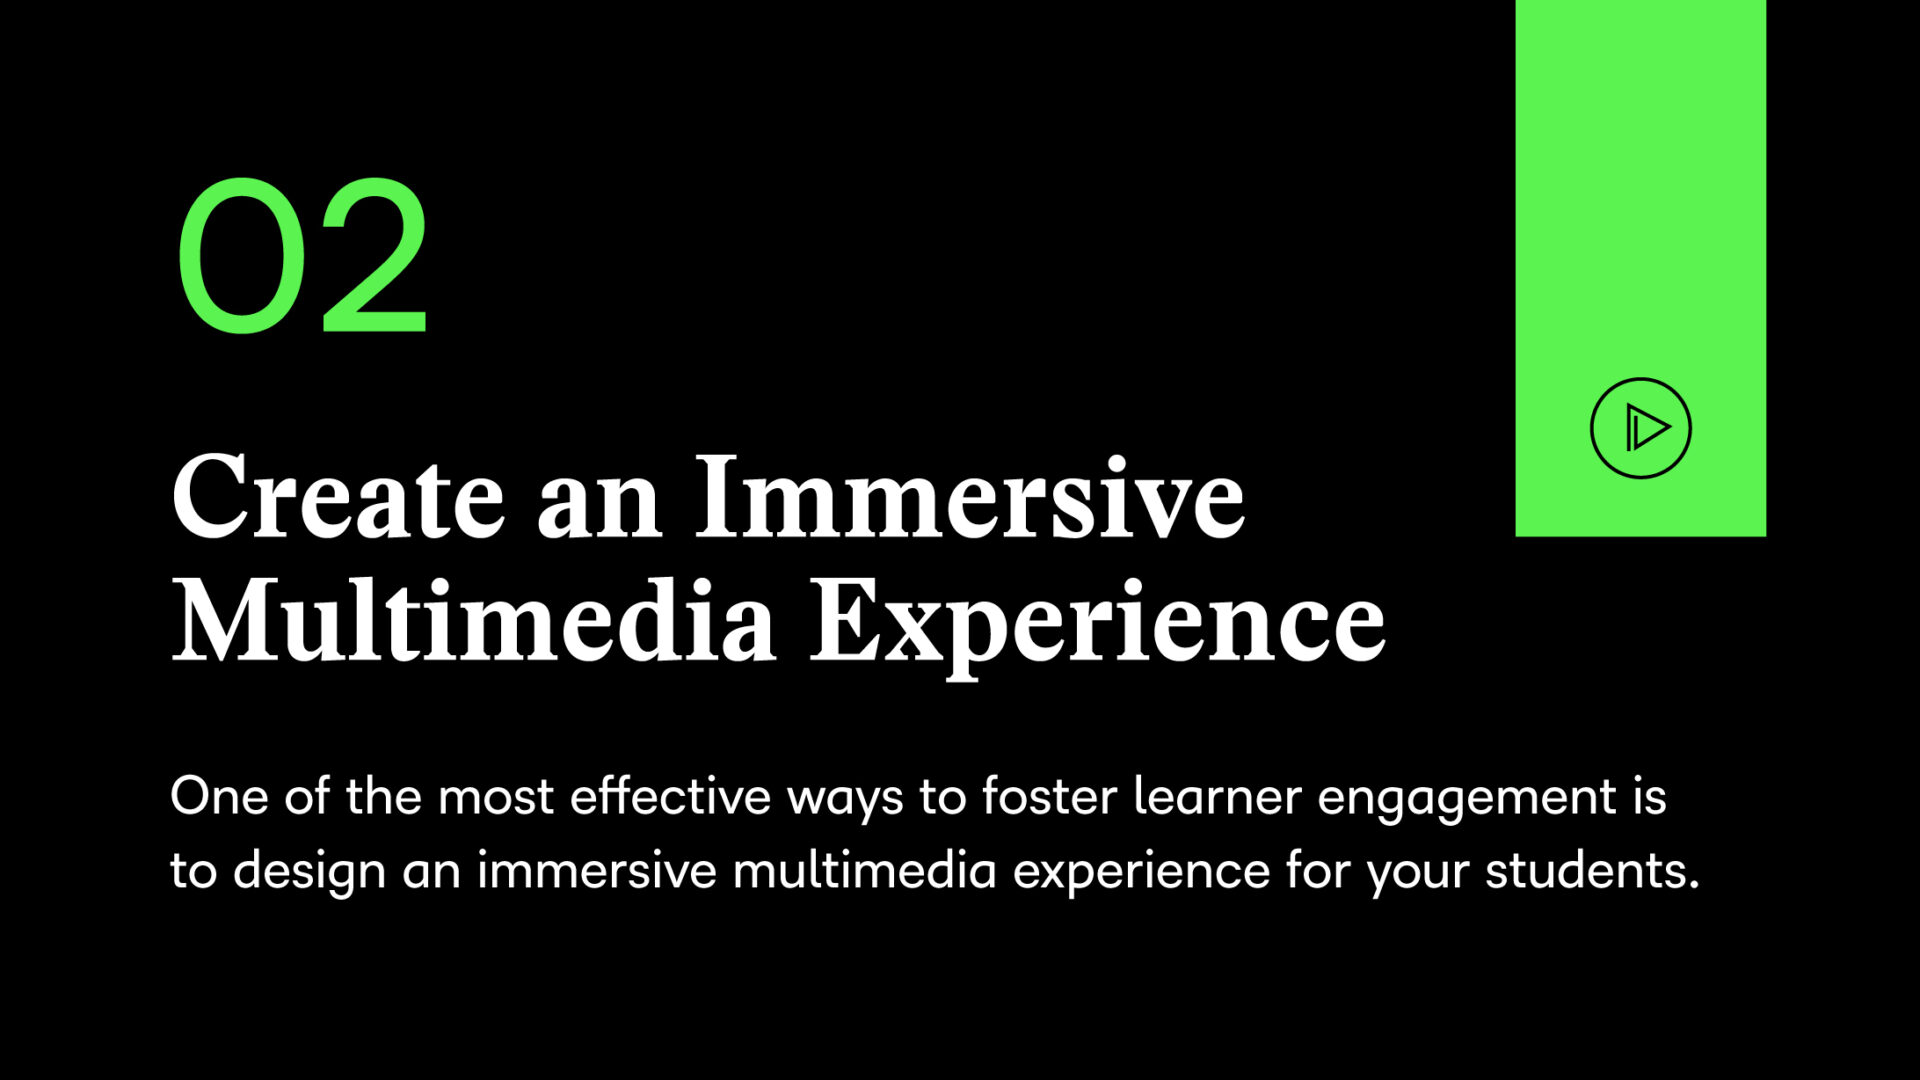 Create an immersive multimedia experience